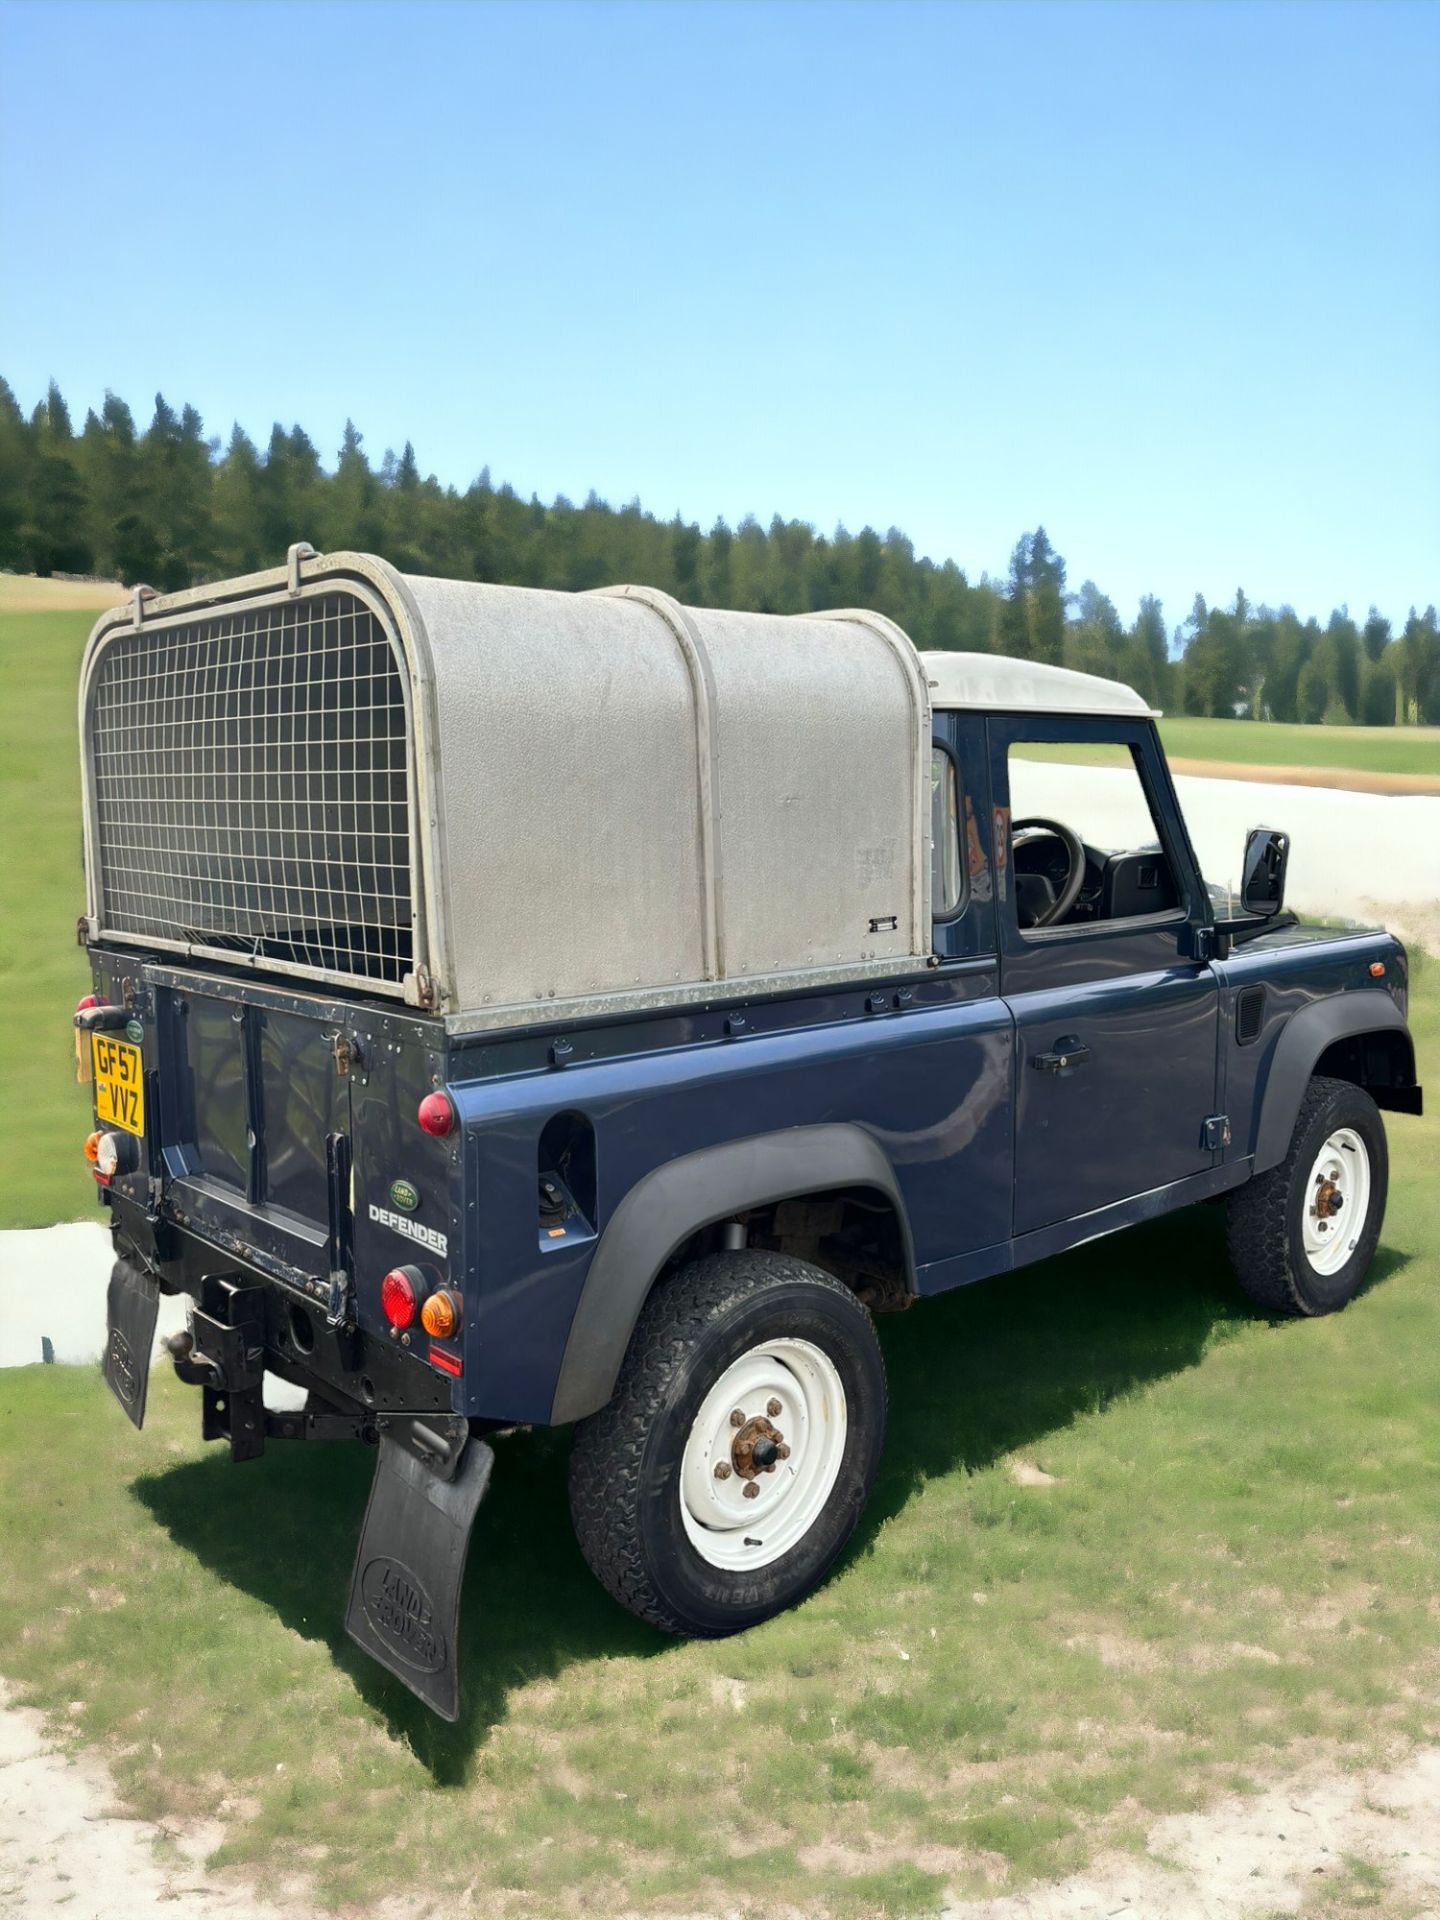 UNLEASH YOUR ADVENTUROUS SPIRIT WITH THE 2008 LAND ROVER DEFENDER 90 TRUCK TDCI - Image 3 of 15